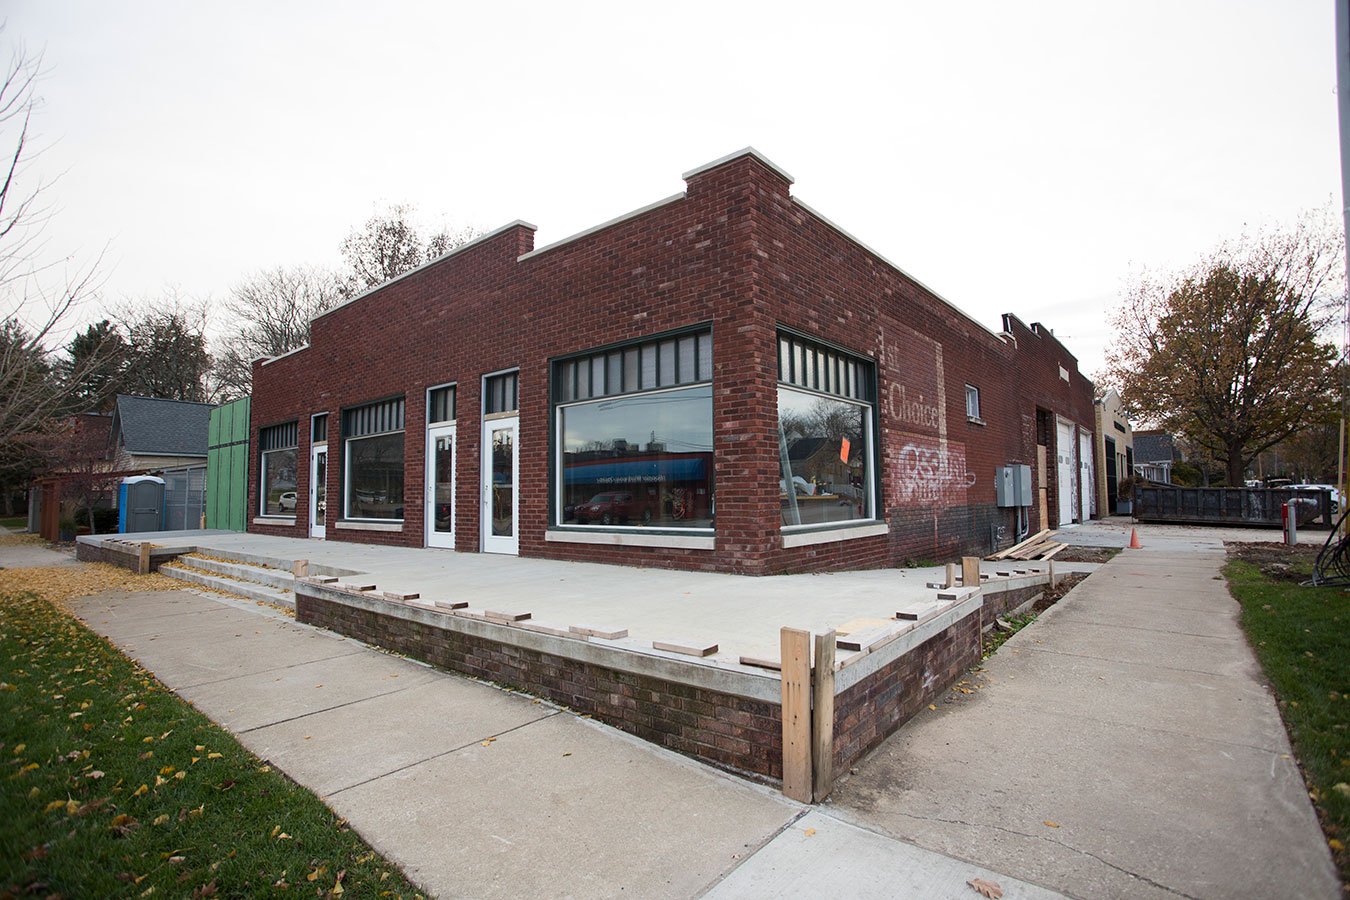  FAR will soon be the newest member of the vibrant Bloomington arts scene. | Photo by Chaz Mottinger, courtesy of Pictura Gallery